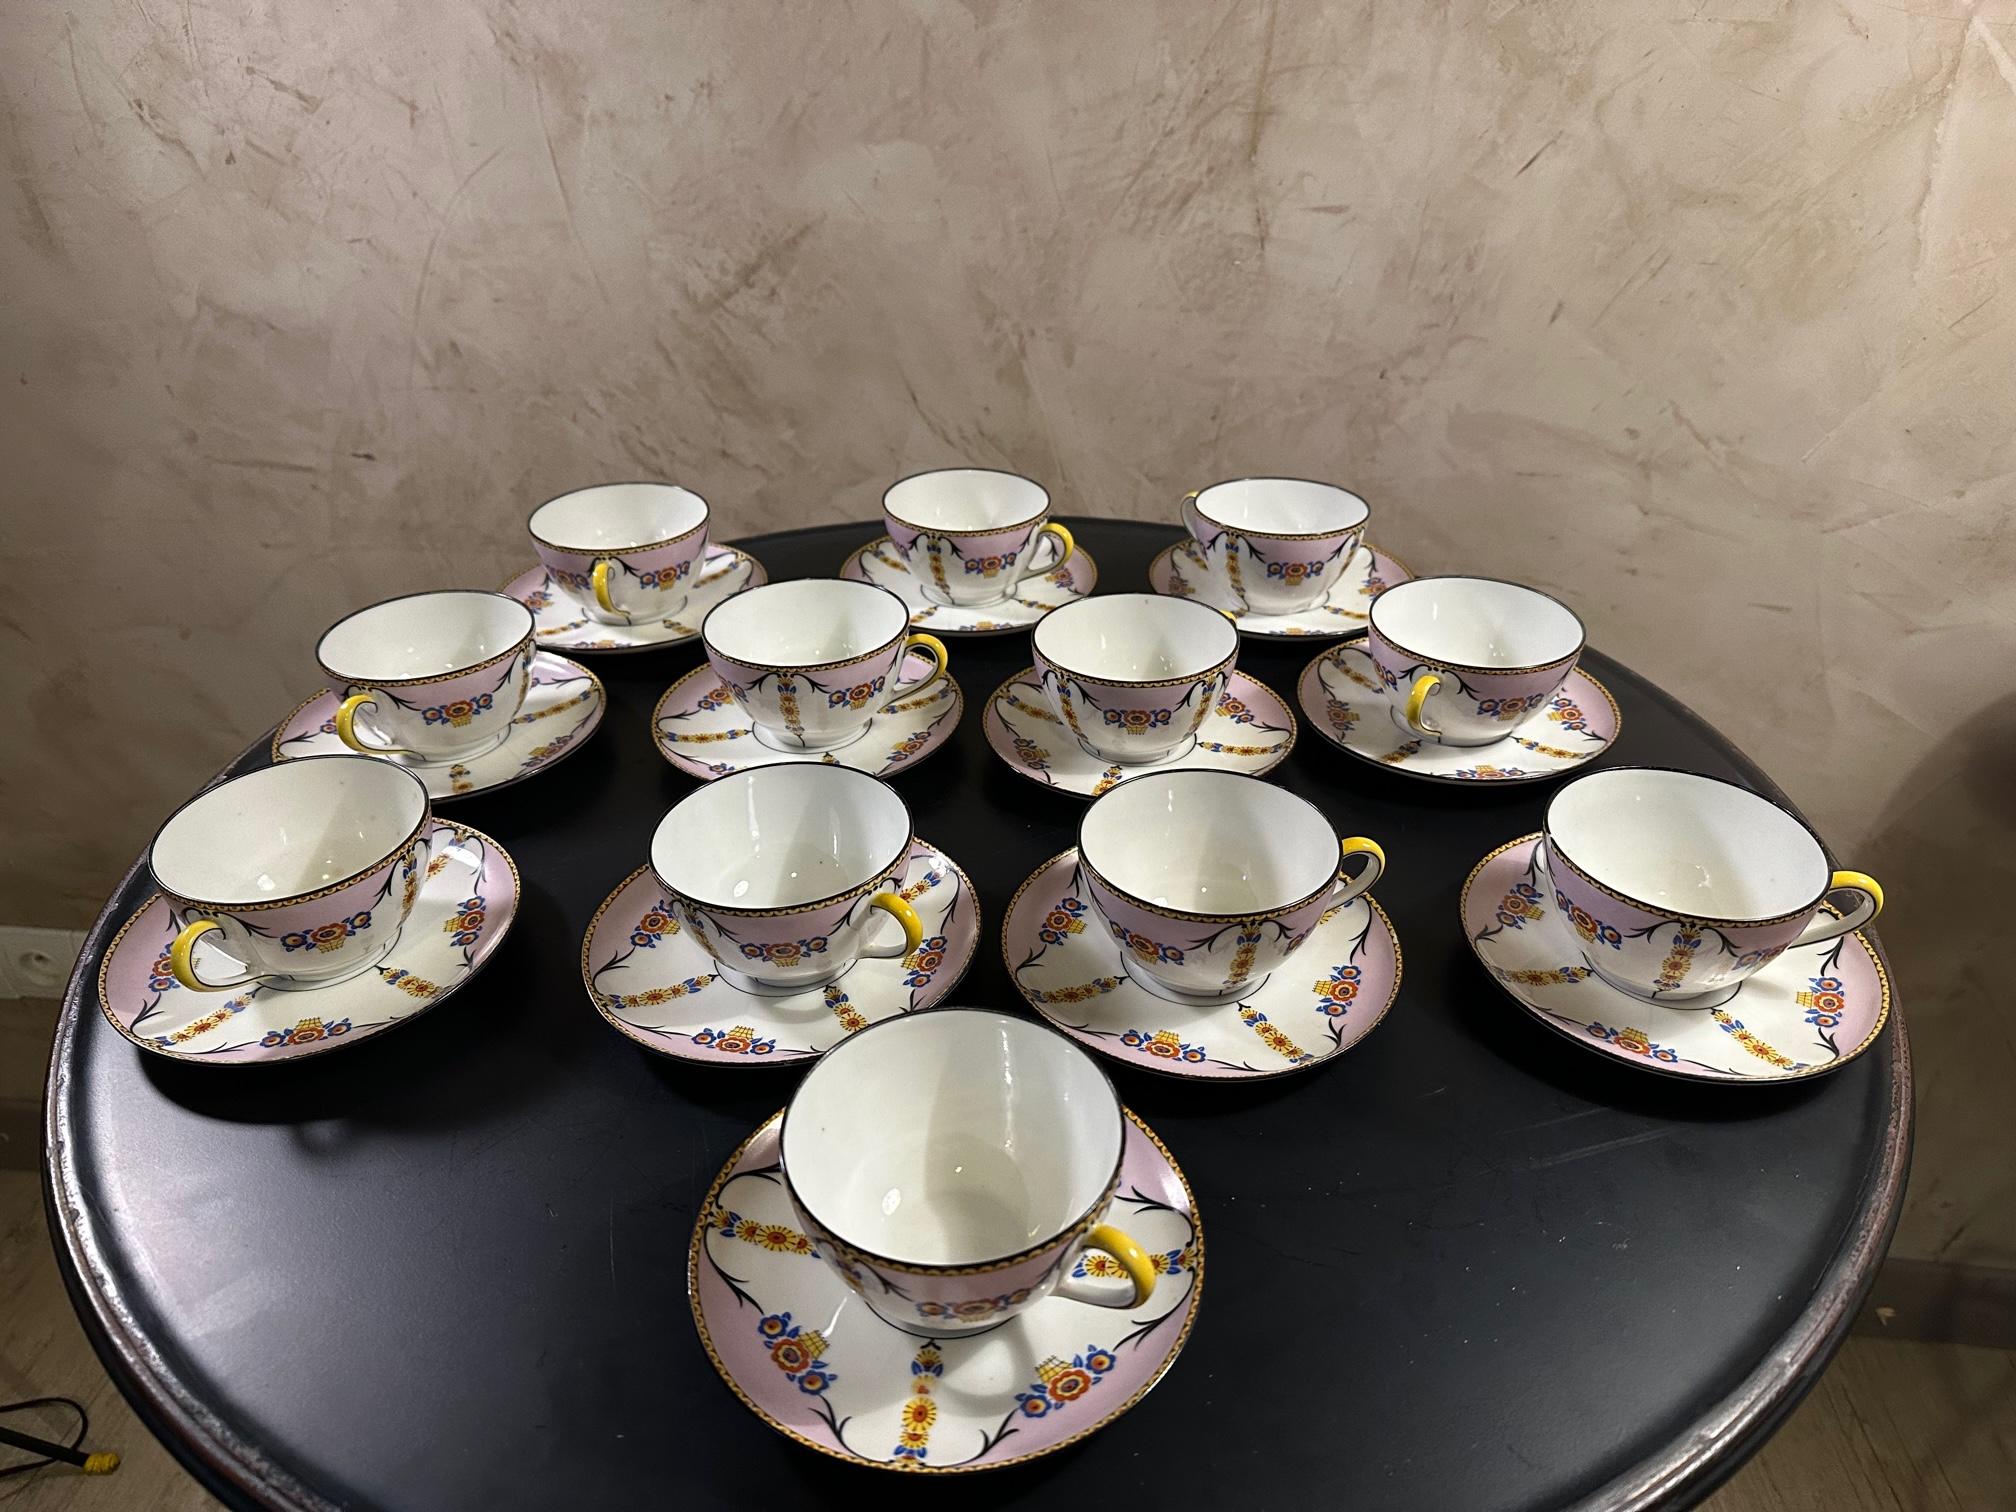 Very beautiful coffee service with their Limoges porcelain saucers dating from 1925 in good condition.
Pretty pink color and blue and yellow flowers.
Just one cup is slightly cracked but very good overall condition.